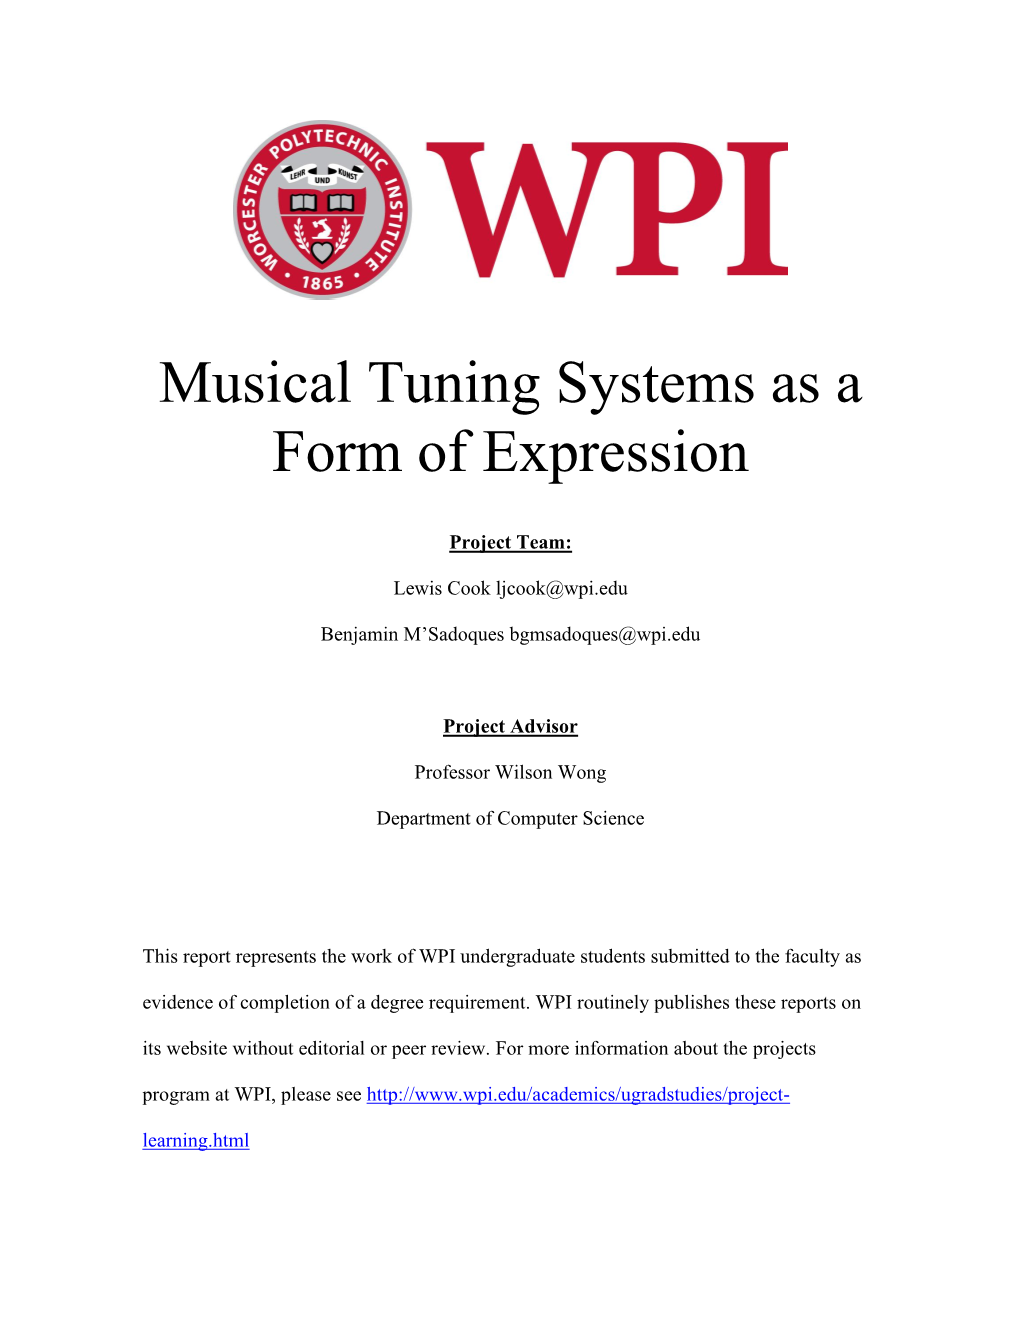 Musical Tuning Systems As a Form of Expression